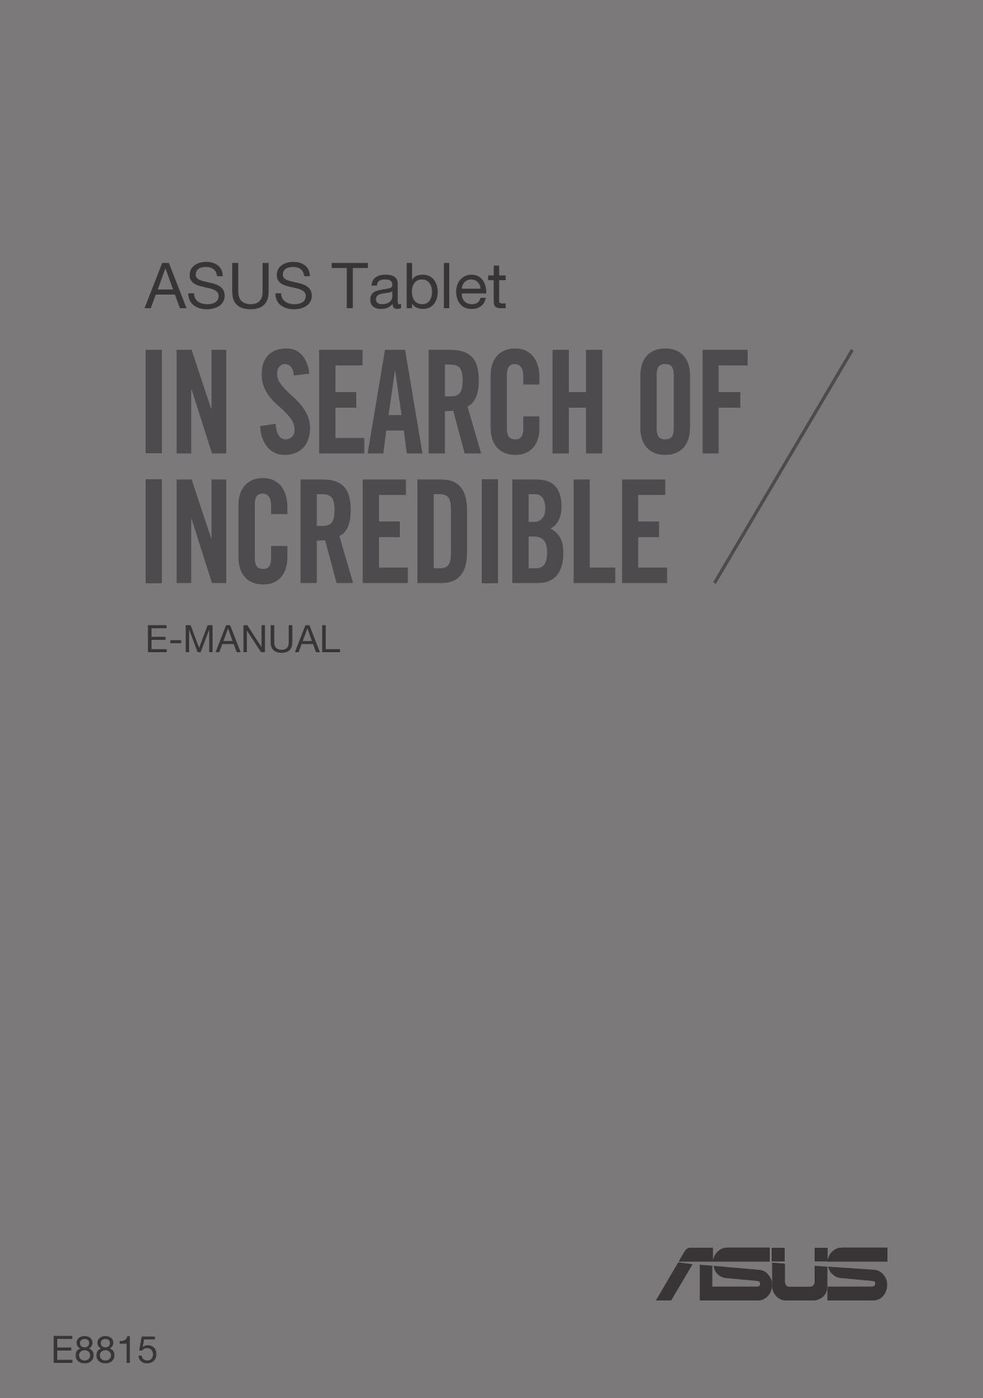 Asus E8815 Graphics Tablet User Manual